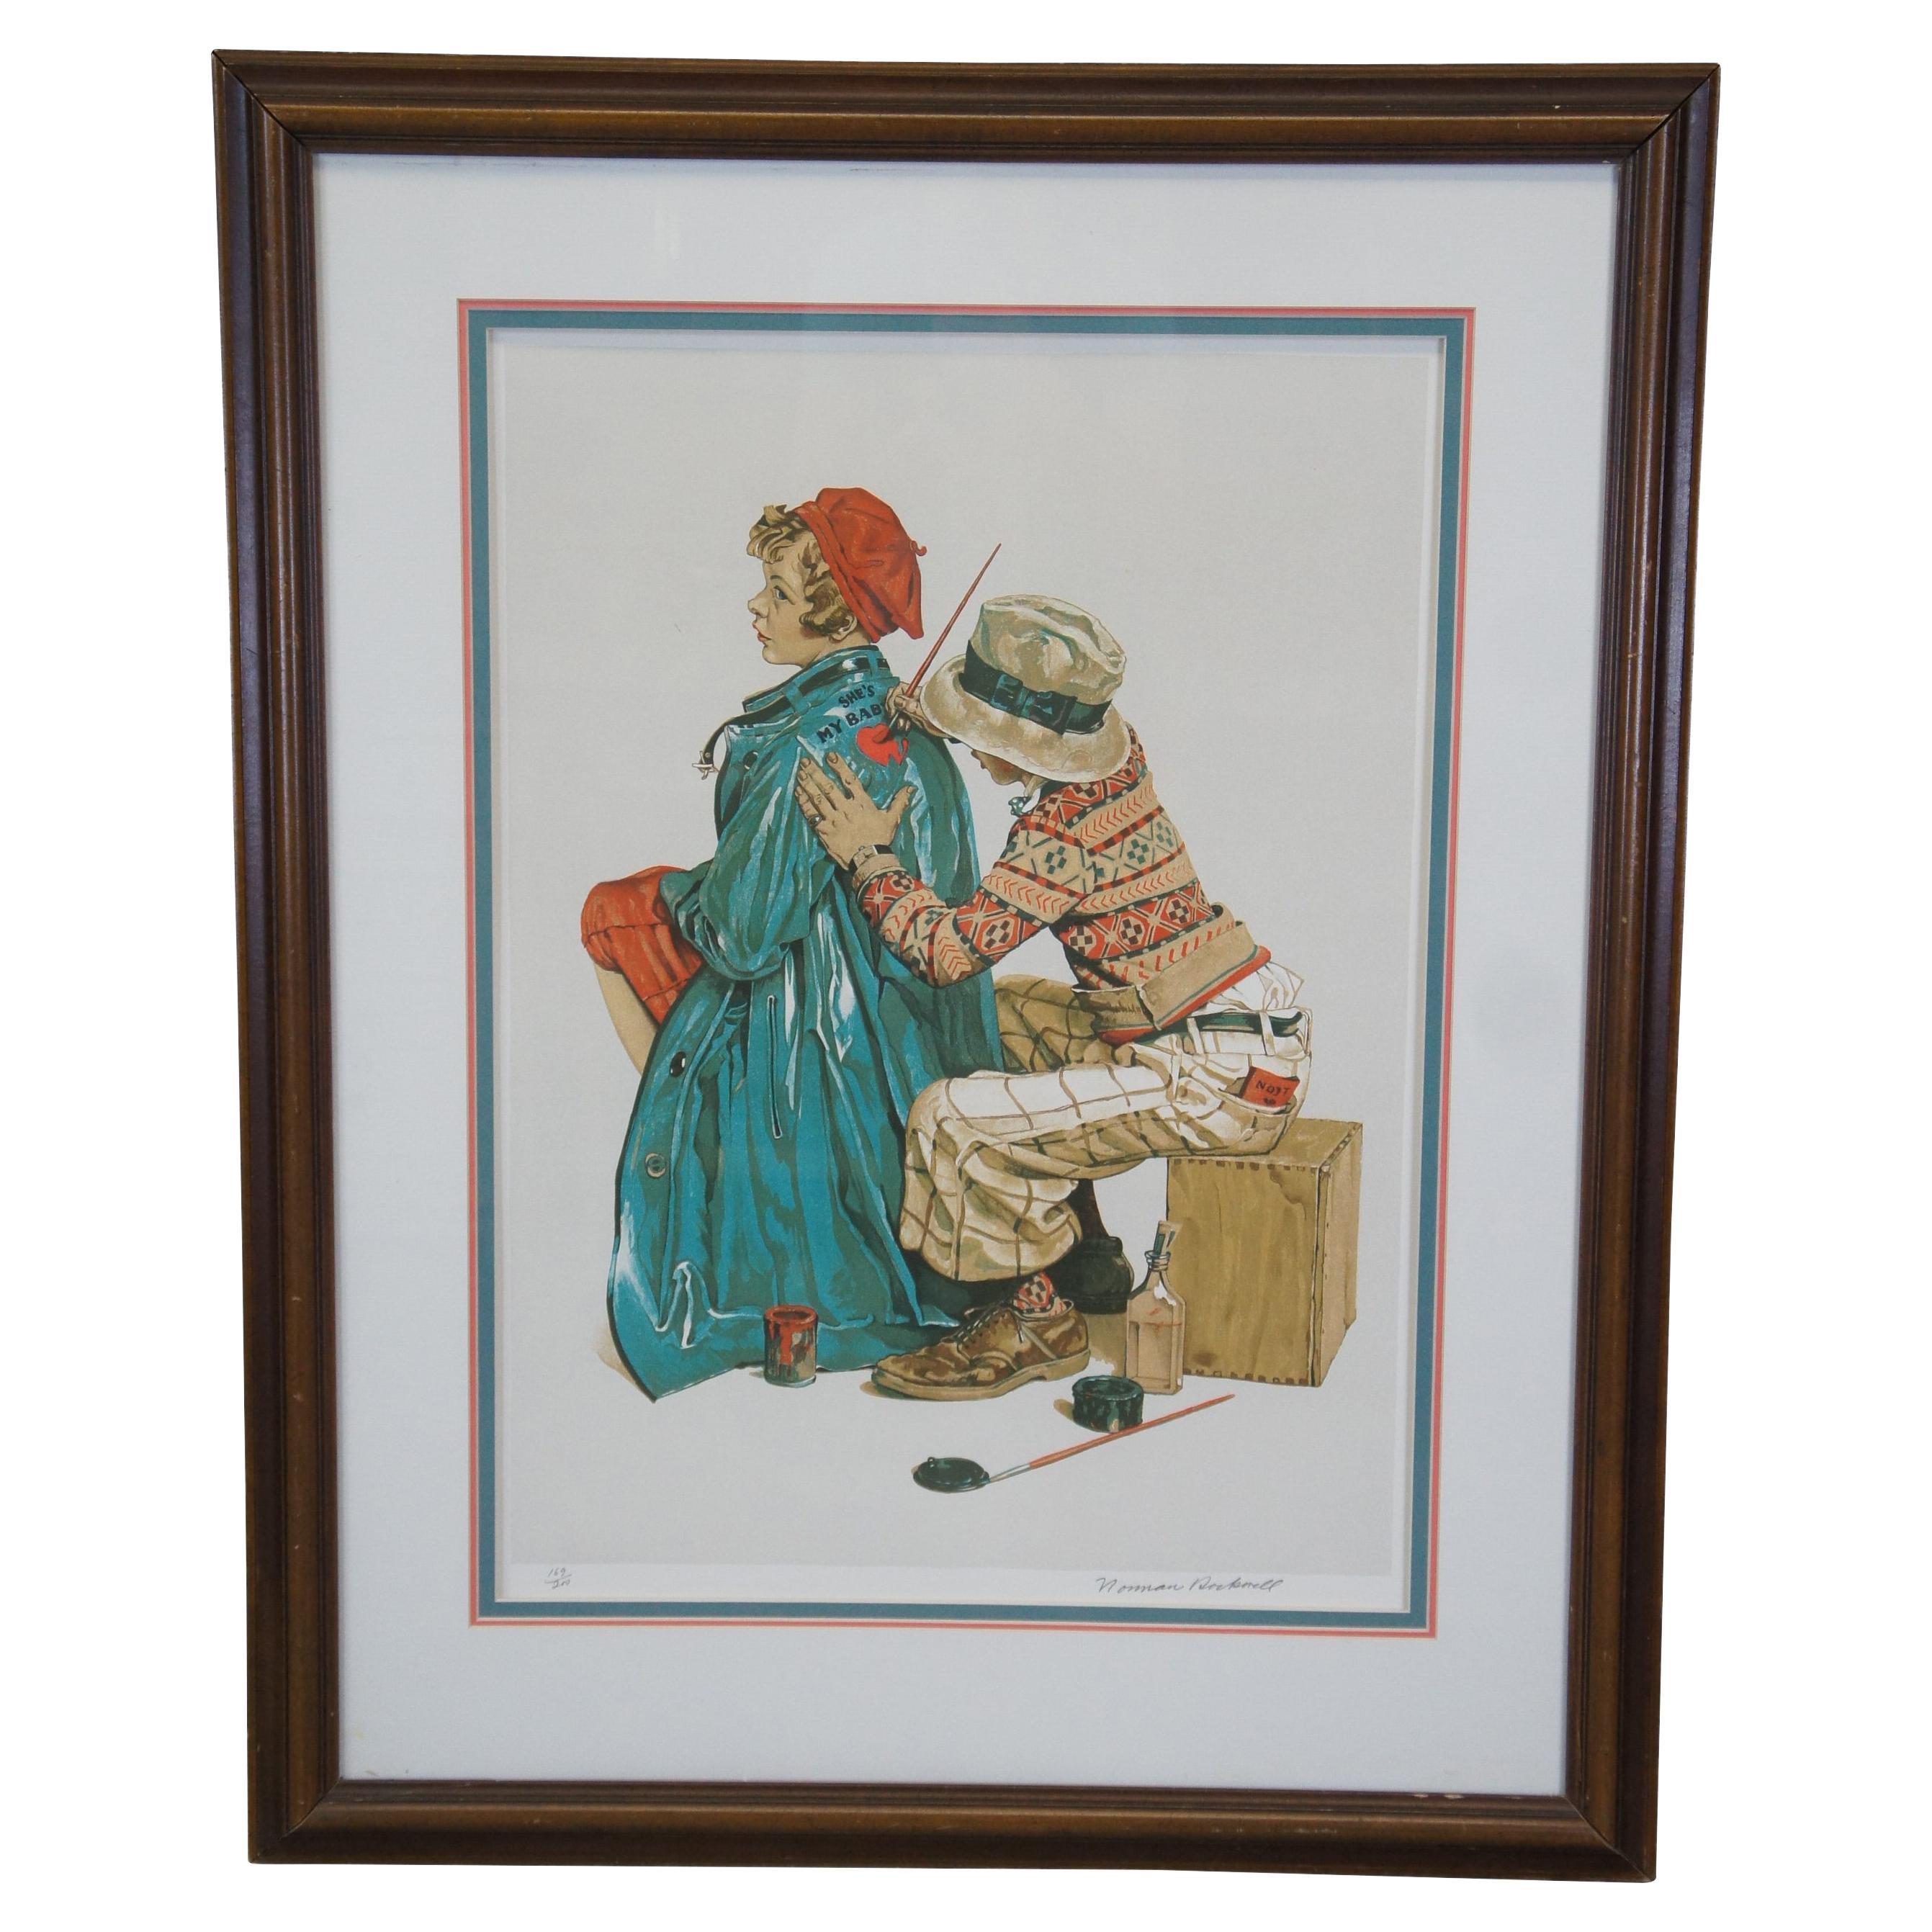 Norman Rockwell "the Young Artist" Hand Signed Original Framed Lithograph For Sale